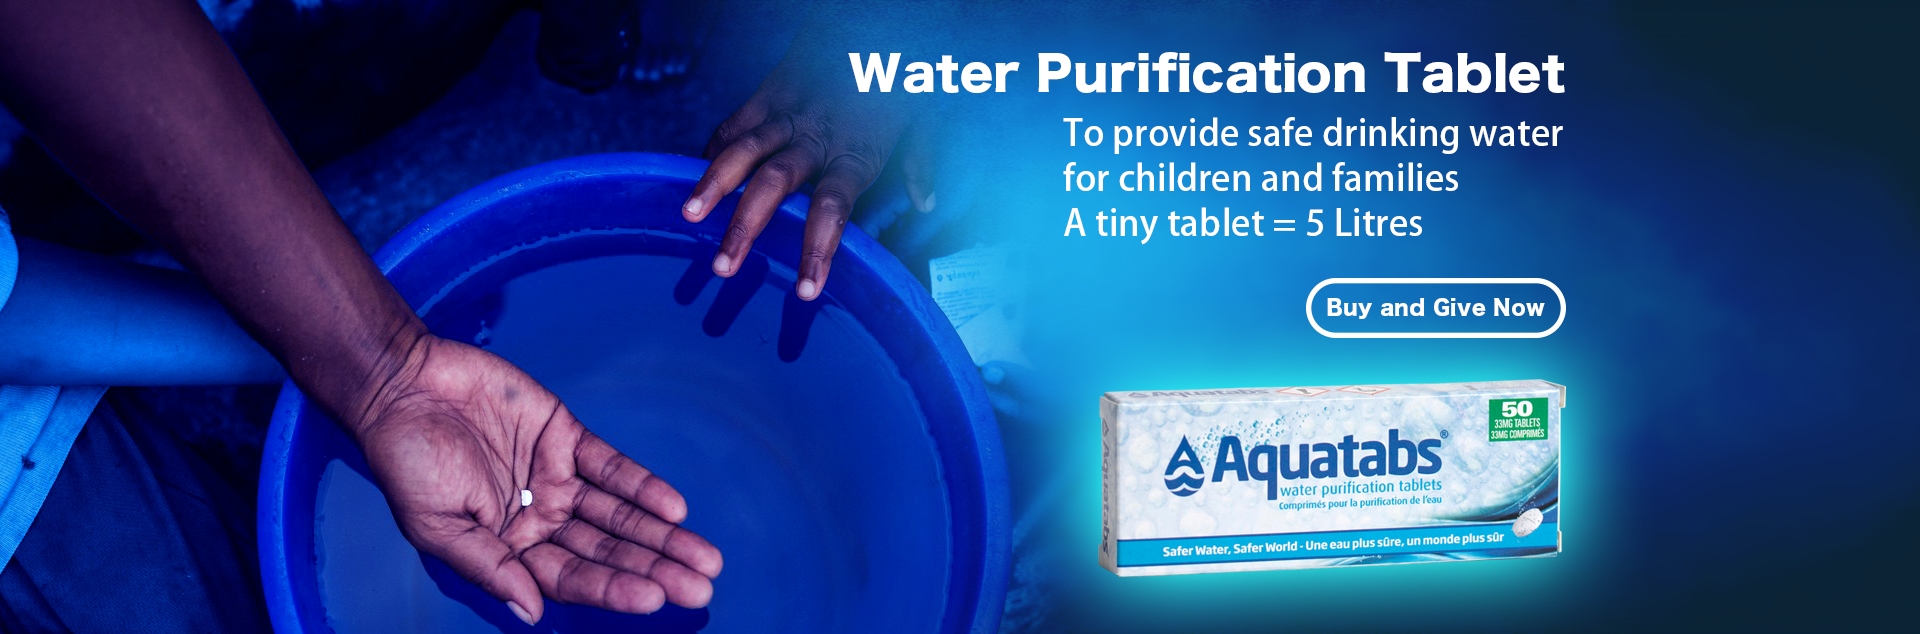 Purification Tablet